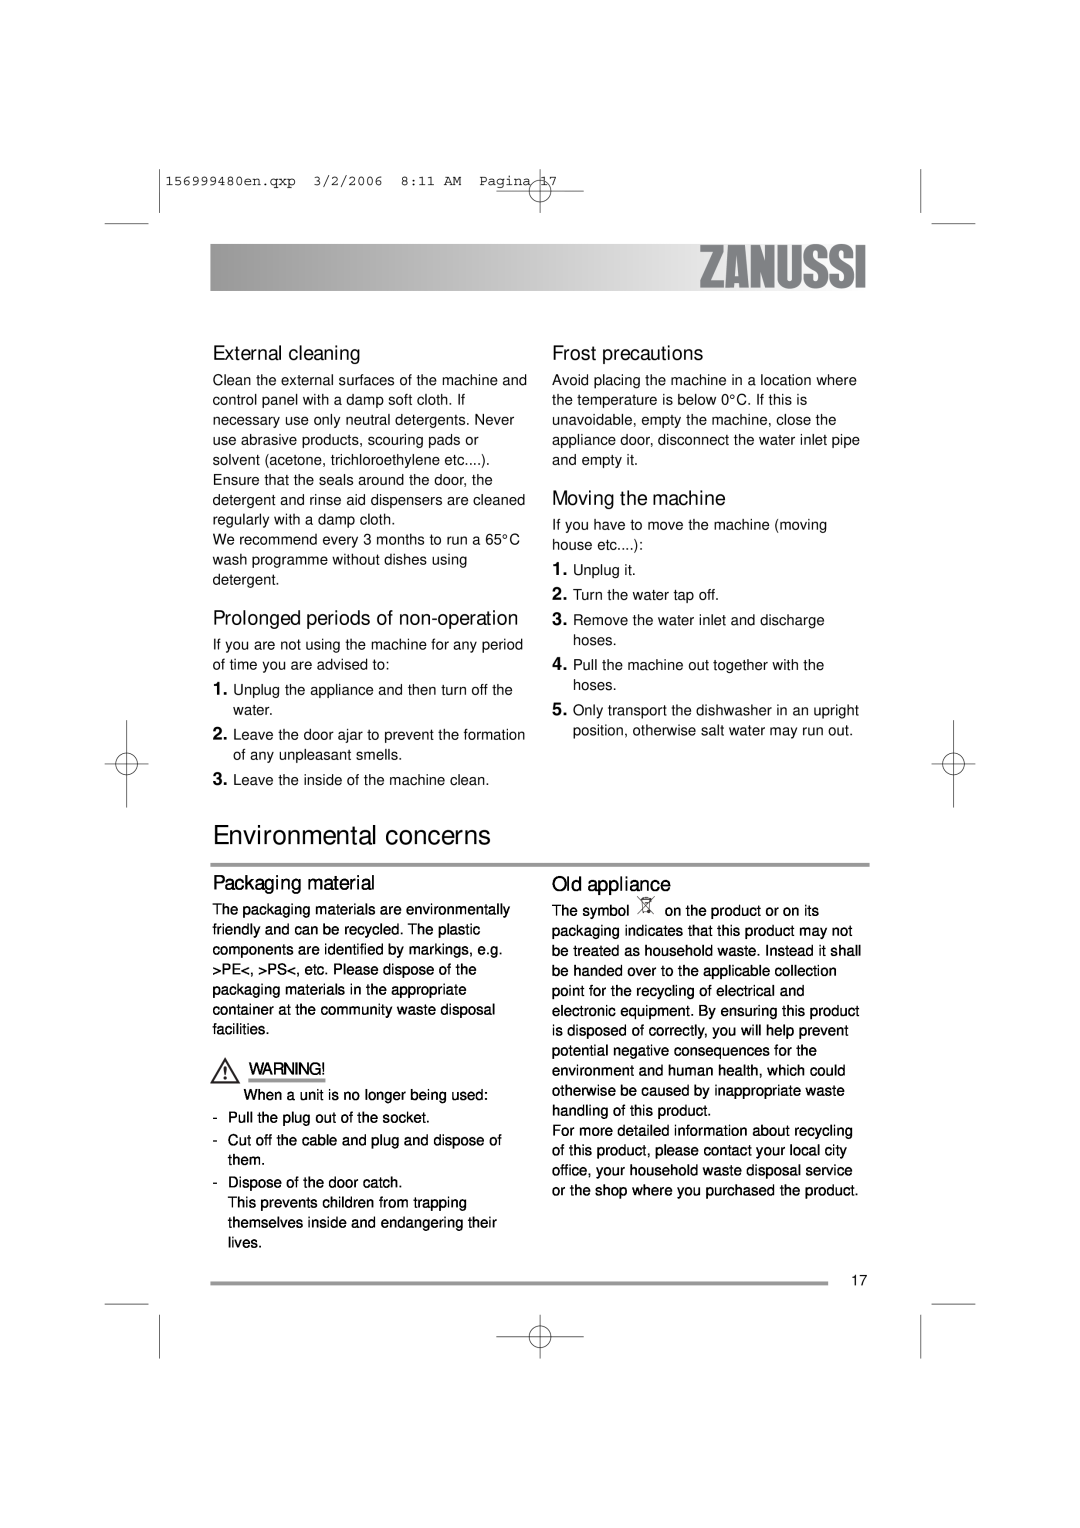 Zanussi ZDF311 Environmental concerns, External cleaning, Frost precautions, Moving the machine, Packaging material 